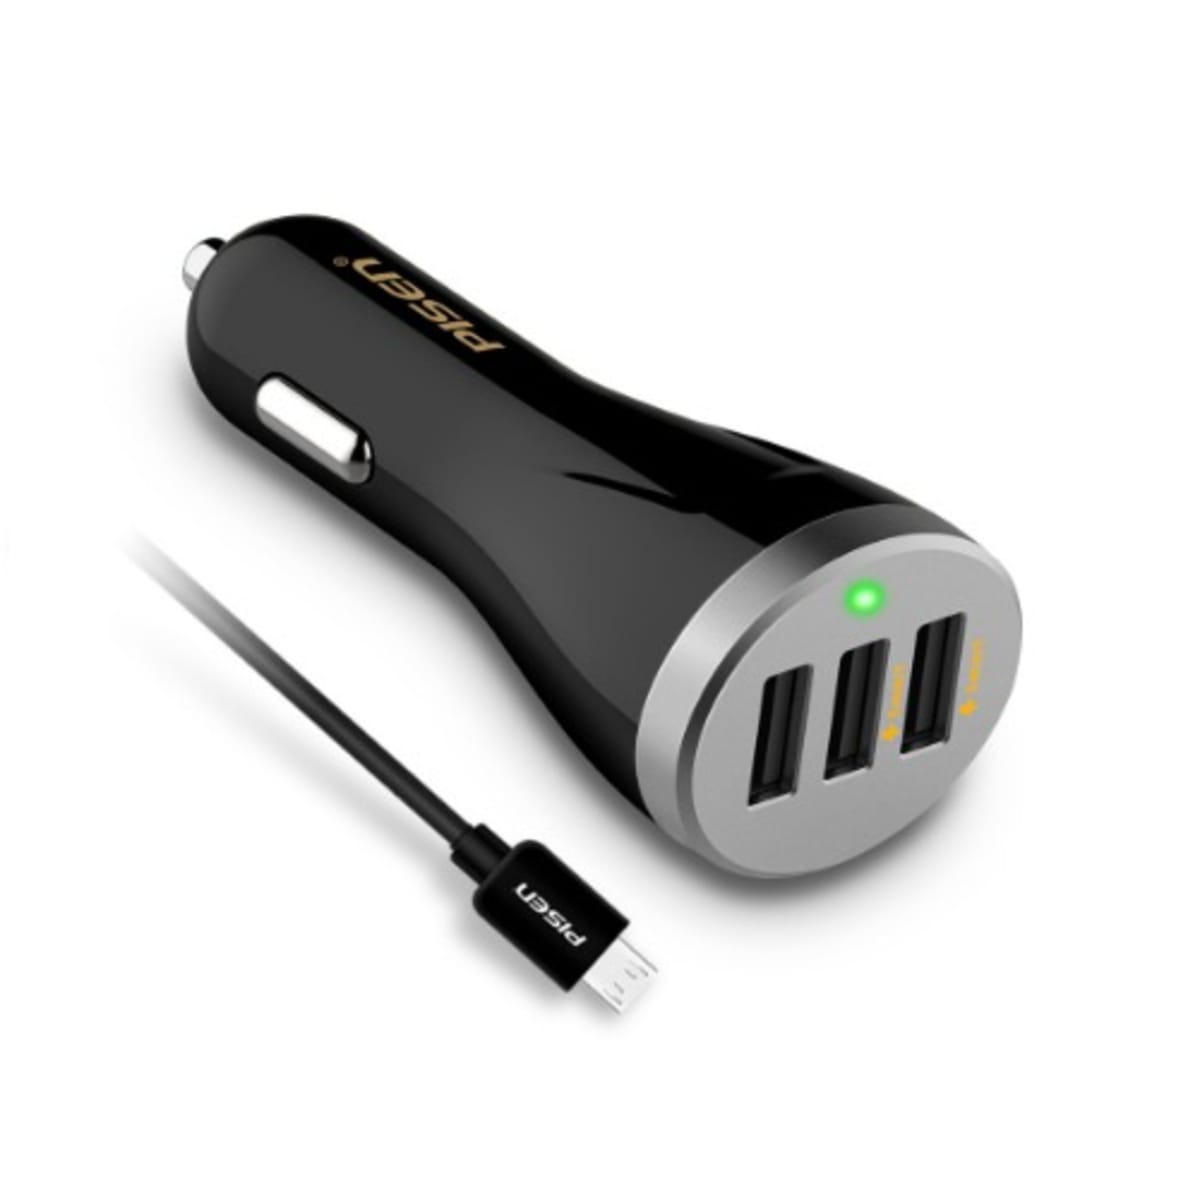 Pisen 3-port Usb Car Charger - 27.5W Max 5.5a Charger Adapter For